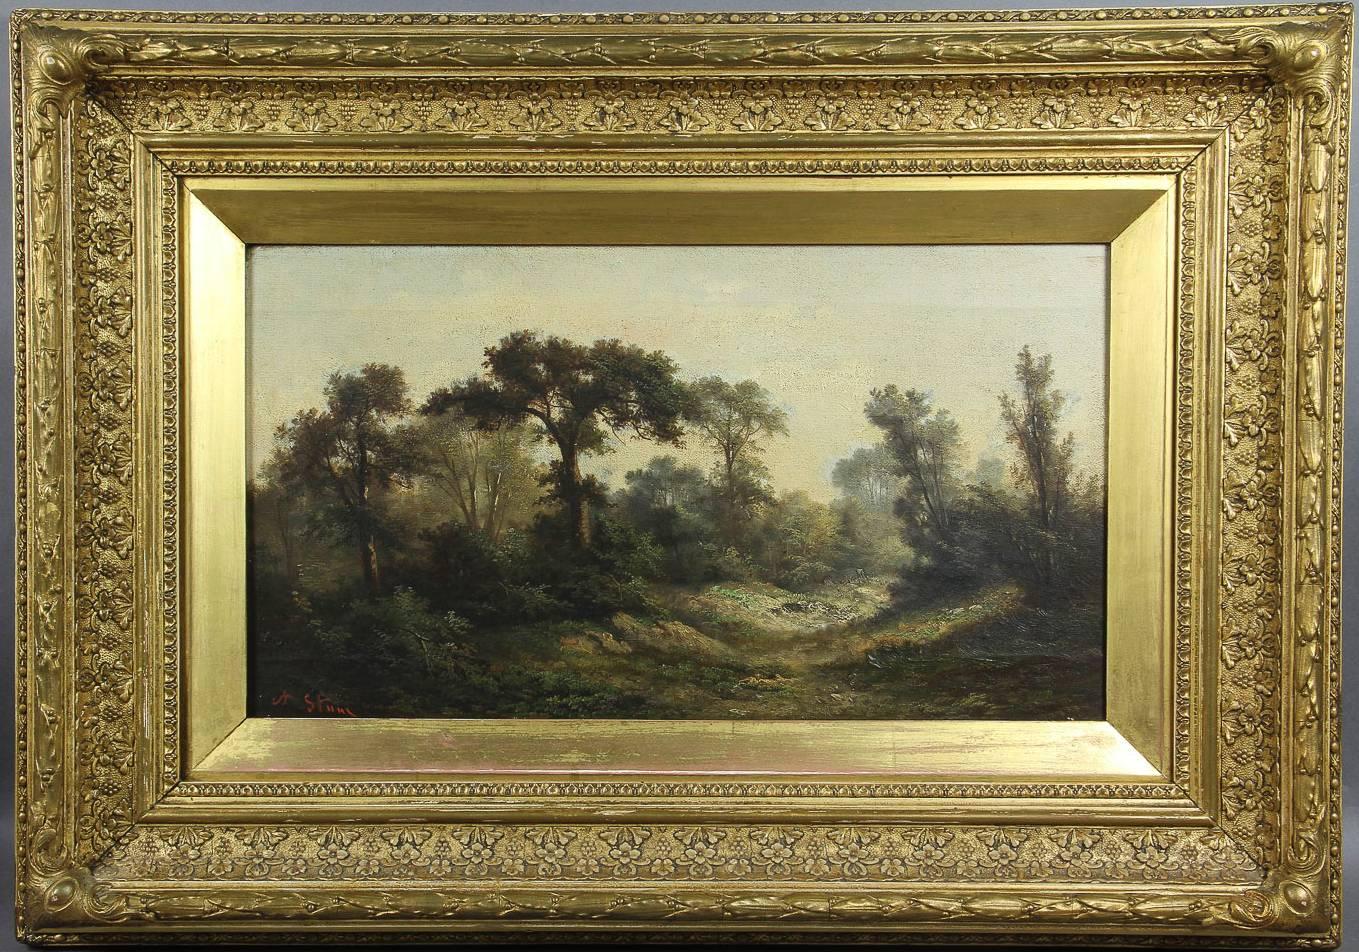 Other Pair of Framed American Landscapes Paintings